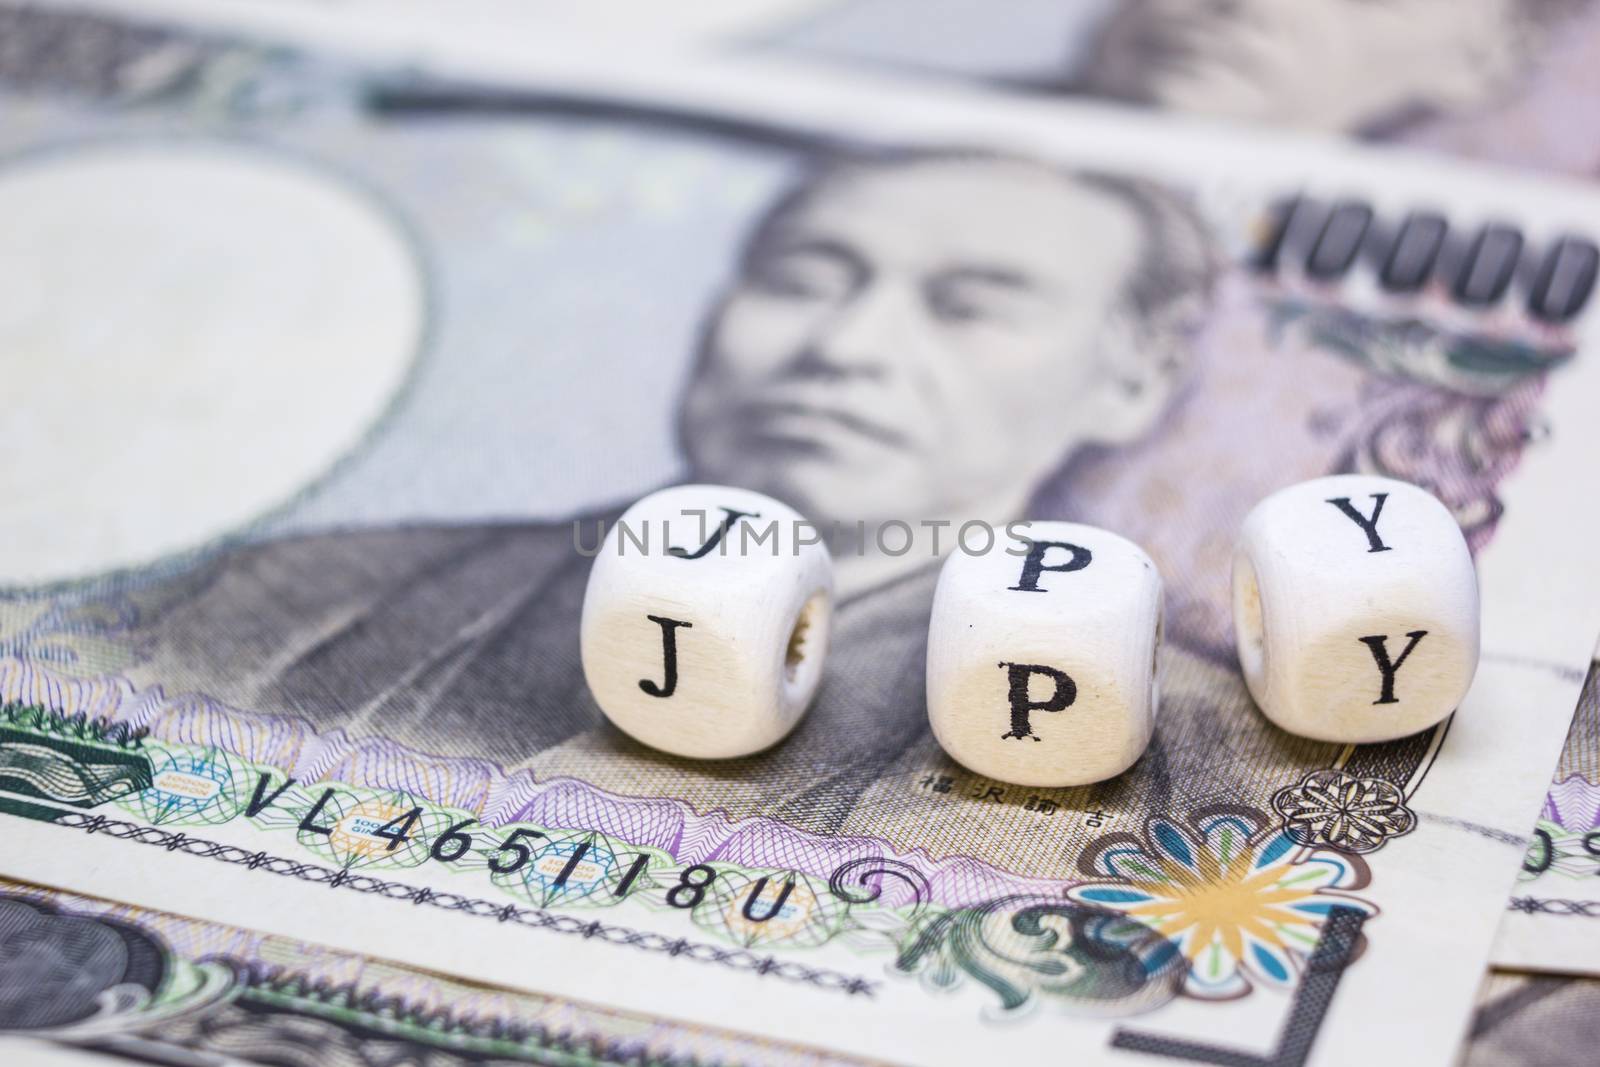 close-up of wooden cube with text "J P Y" on banknote YEN for business and financial concept.